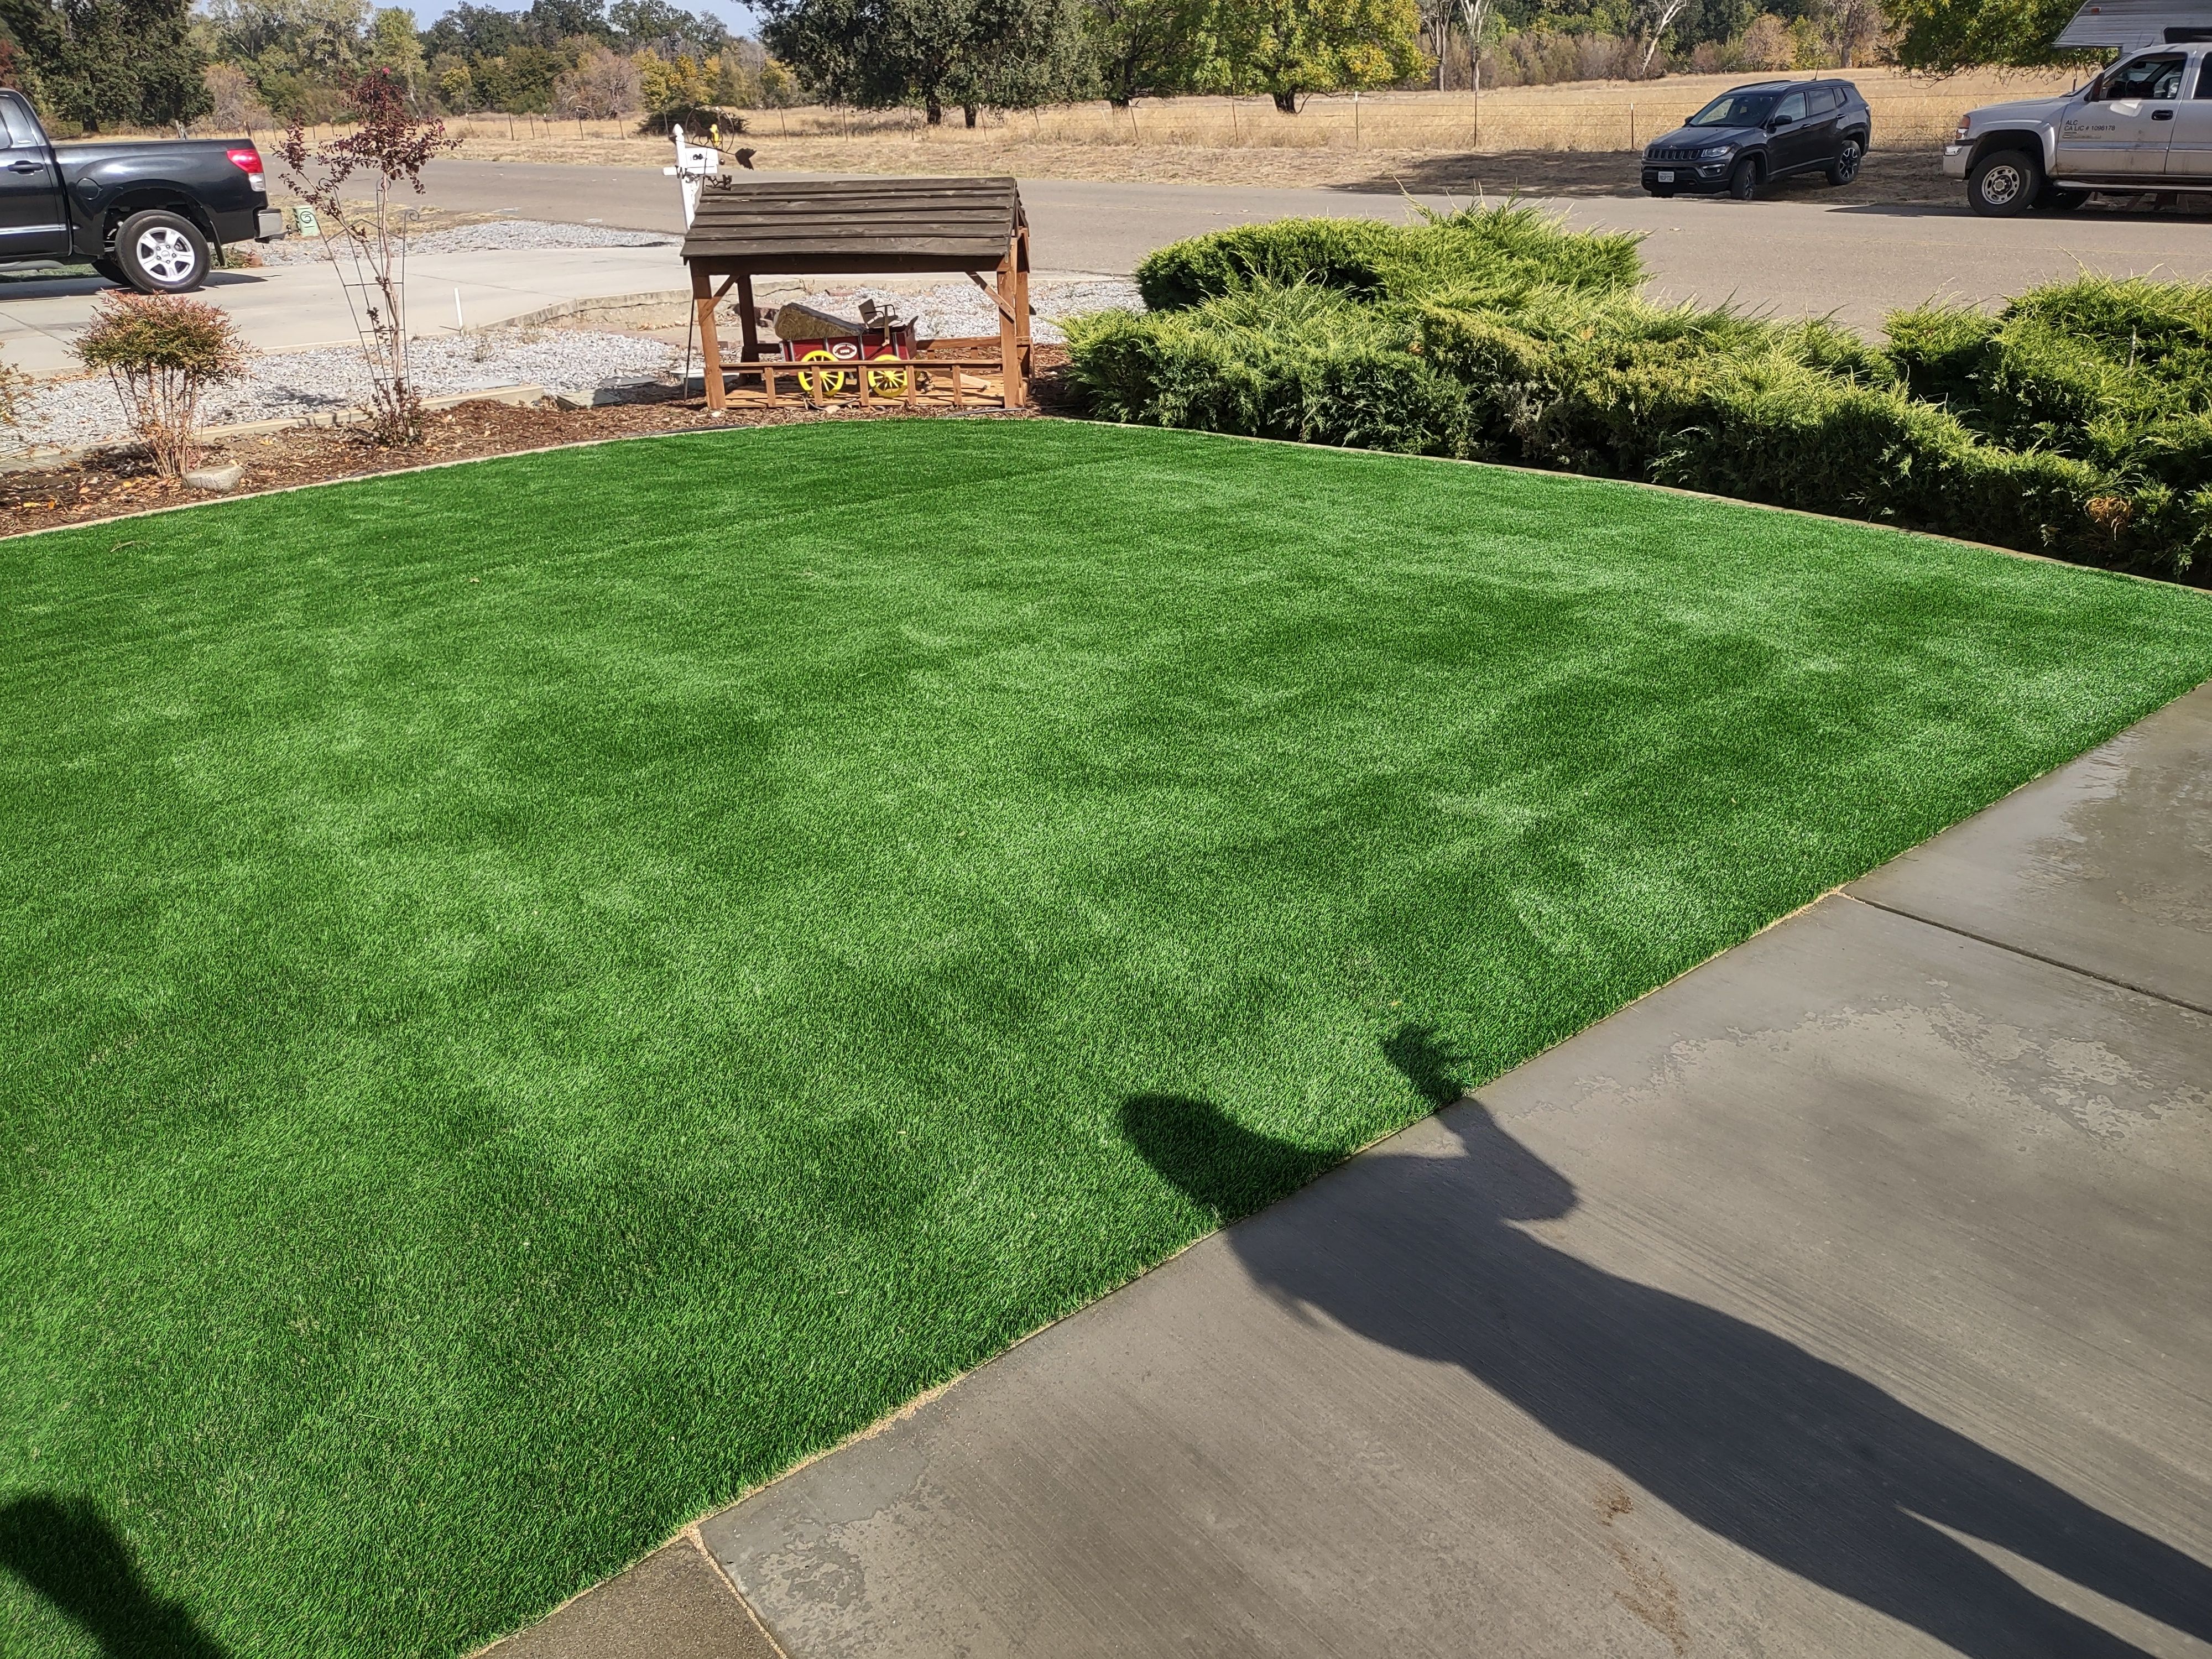 Landscaping for Austin LoBue Construction in Cottonwood, CA